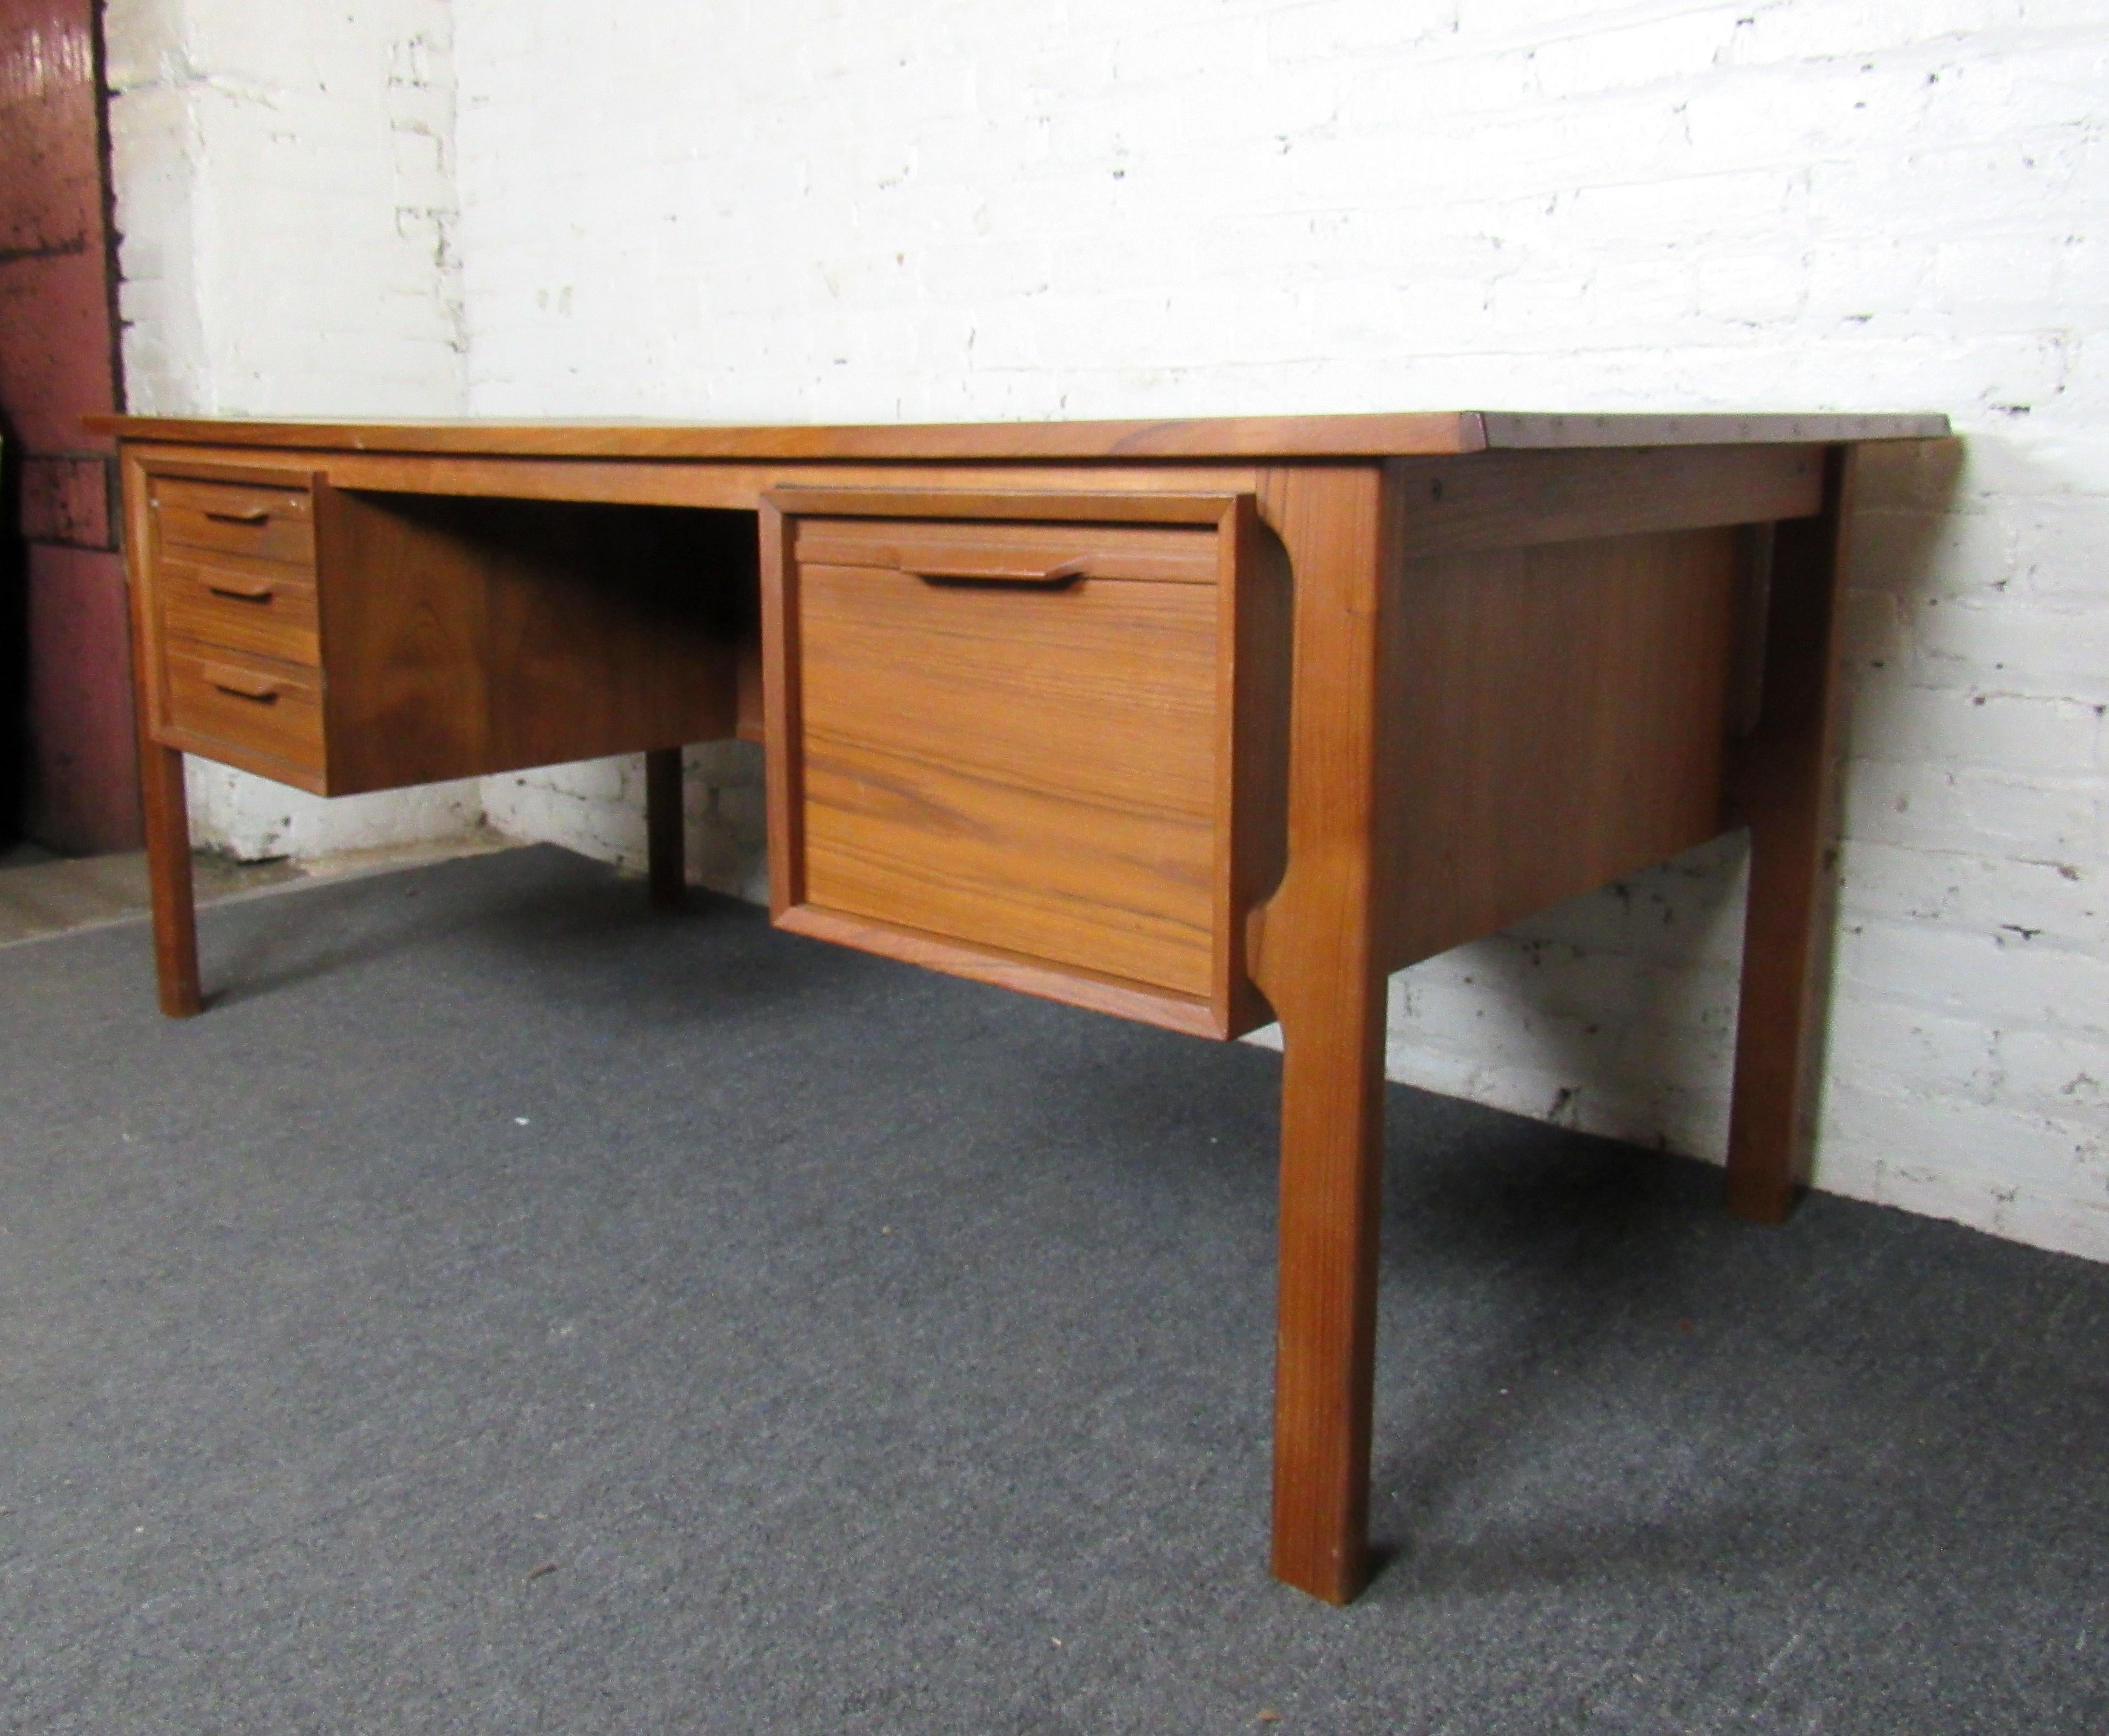 Sturdy and well-built, this Mid-Century Modern desk by Uldum Møbelfabrik combines design with solid quality. Drawers and a storage compartment allow for organization and make this desk an elegant staple of any home office. Please confirm item